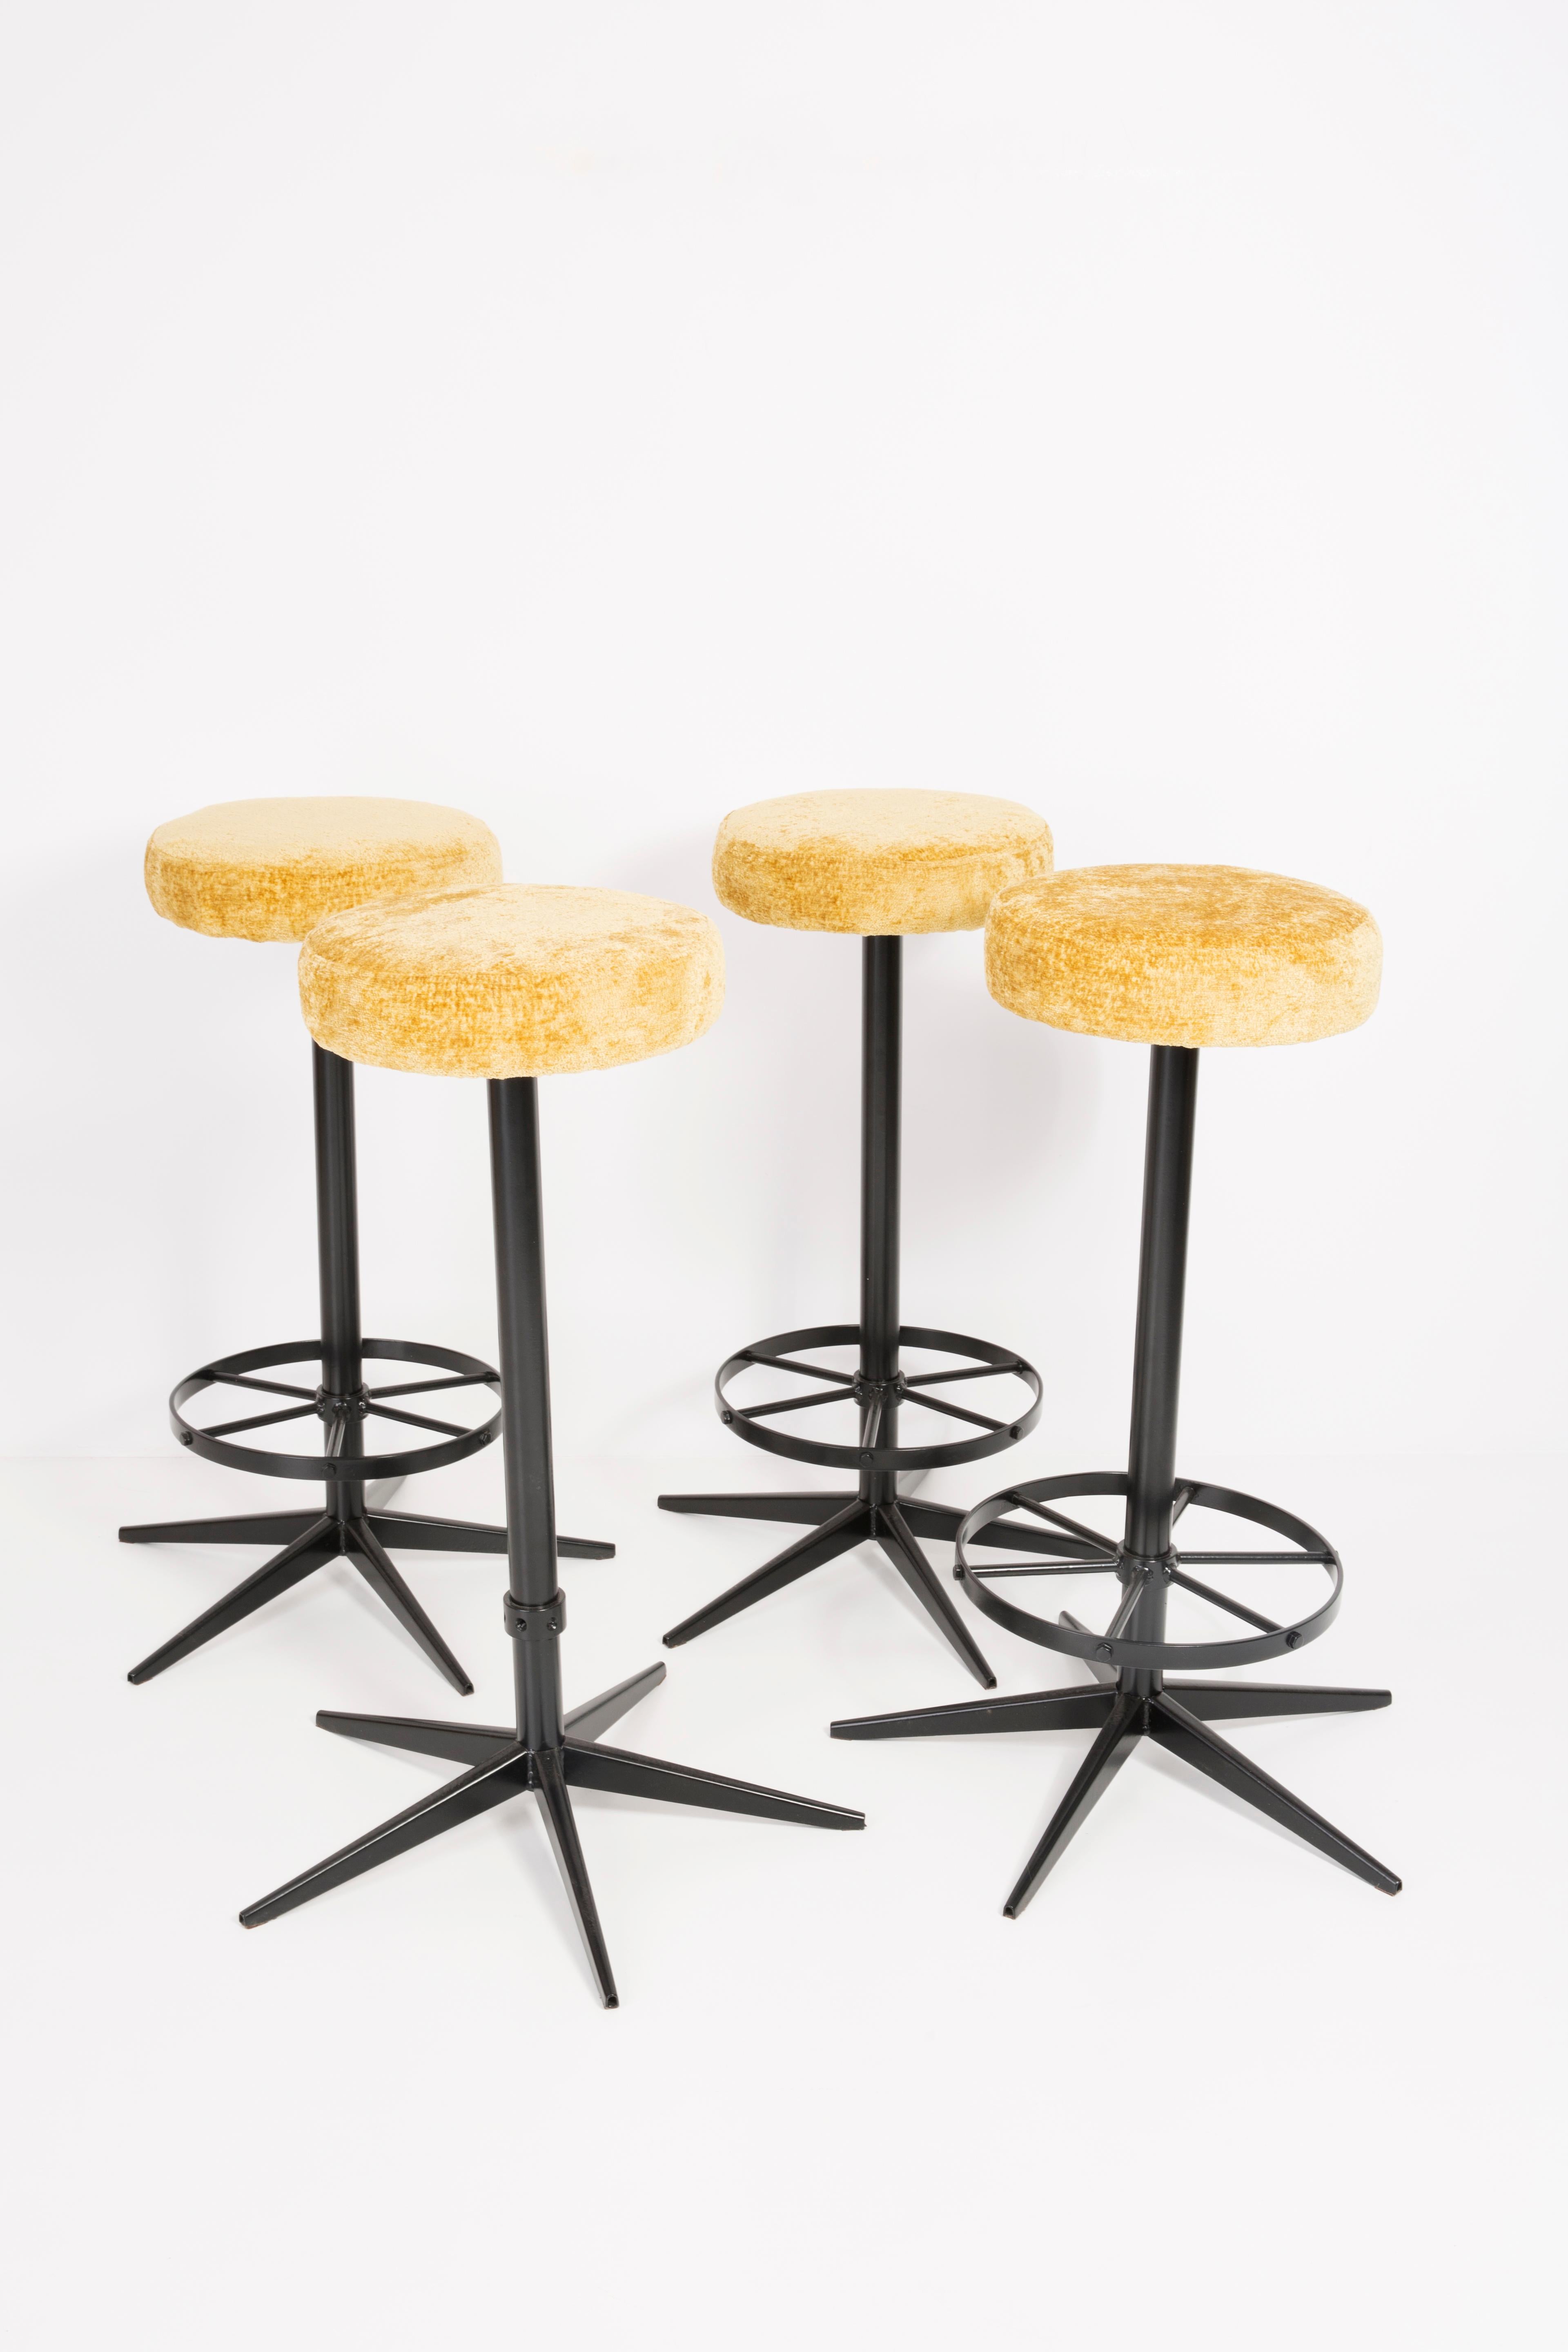 Vintage Modern Yellow Bar Stool, Germany, 1960s For Sale 1